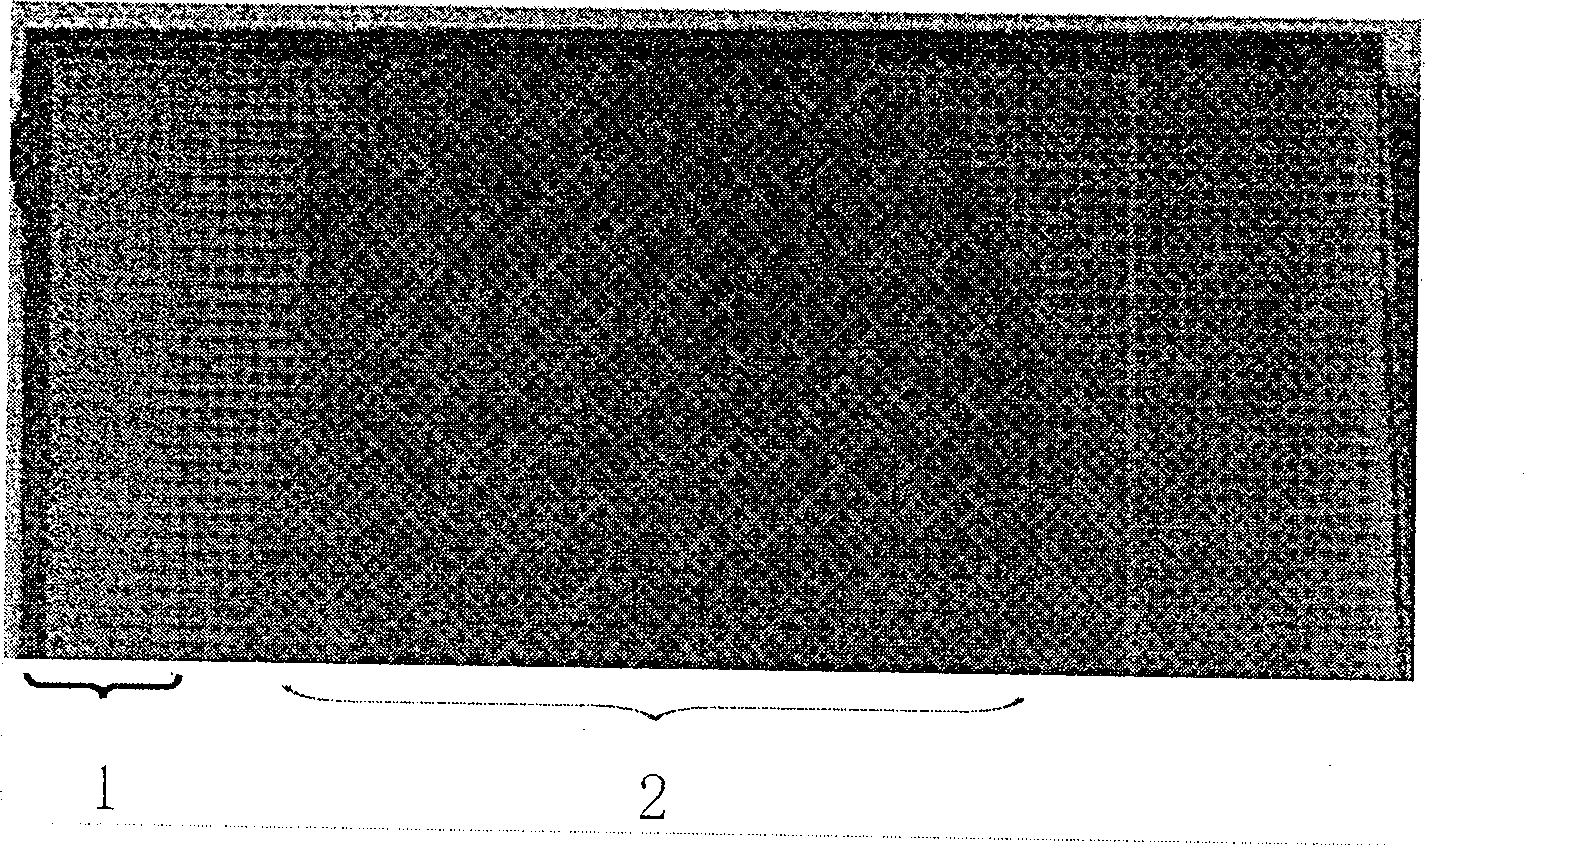 Double-doped lithium niobate crystsal and method for making same